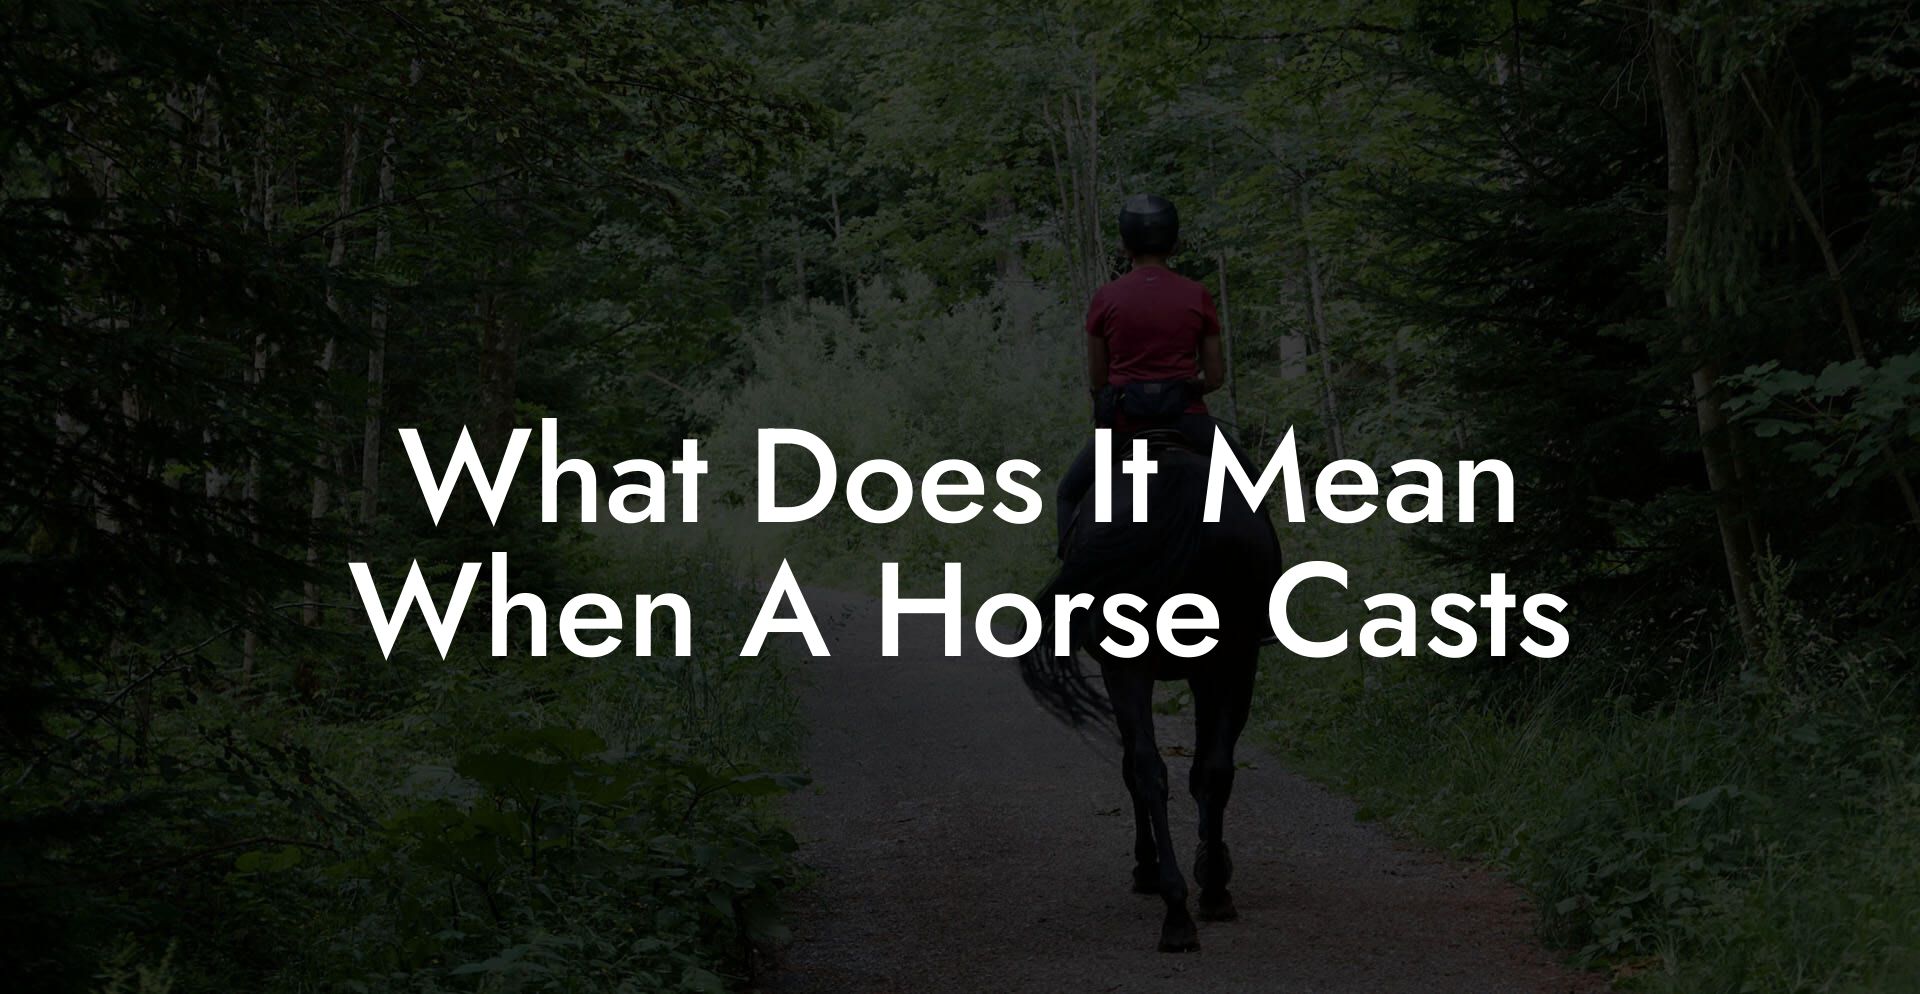 What Does It Mean When A Horse Casts